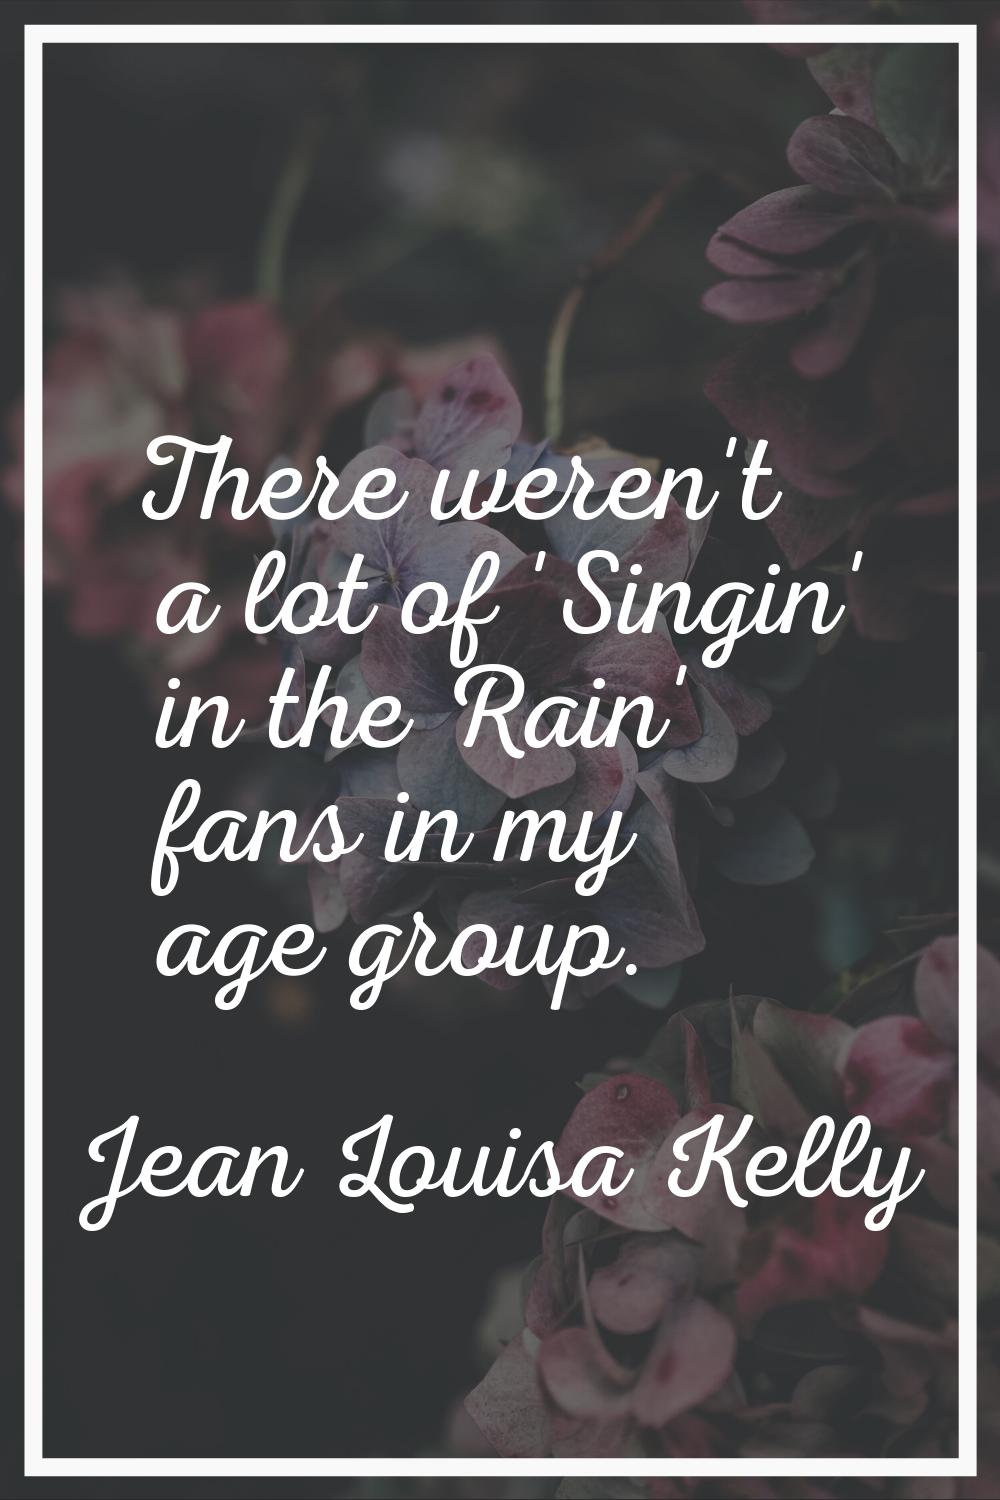 There weren't a lot of 'Singin' in the Rain' fans in my age group.